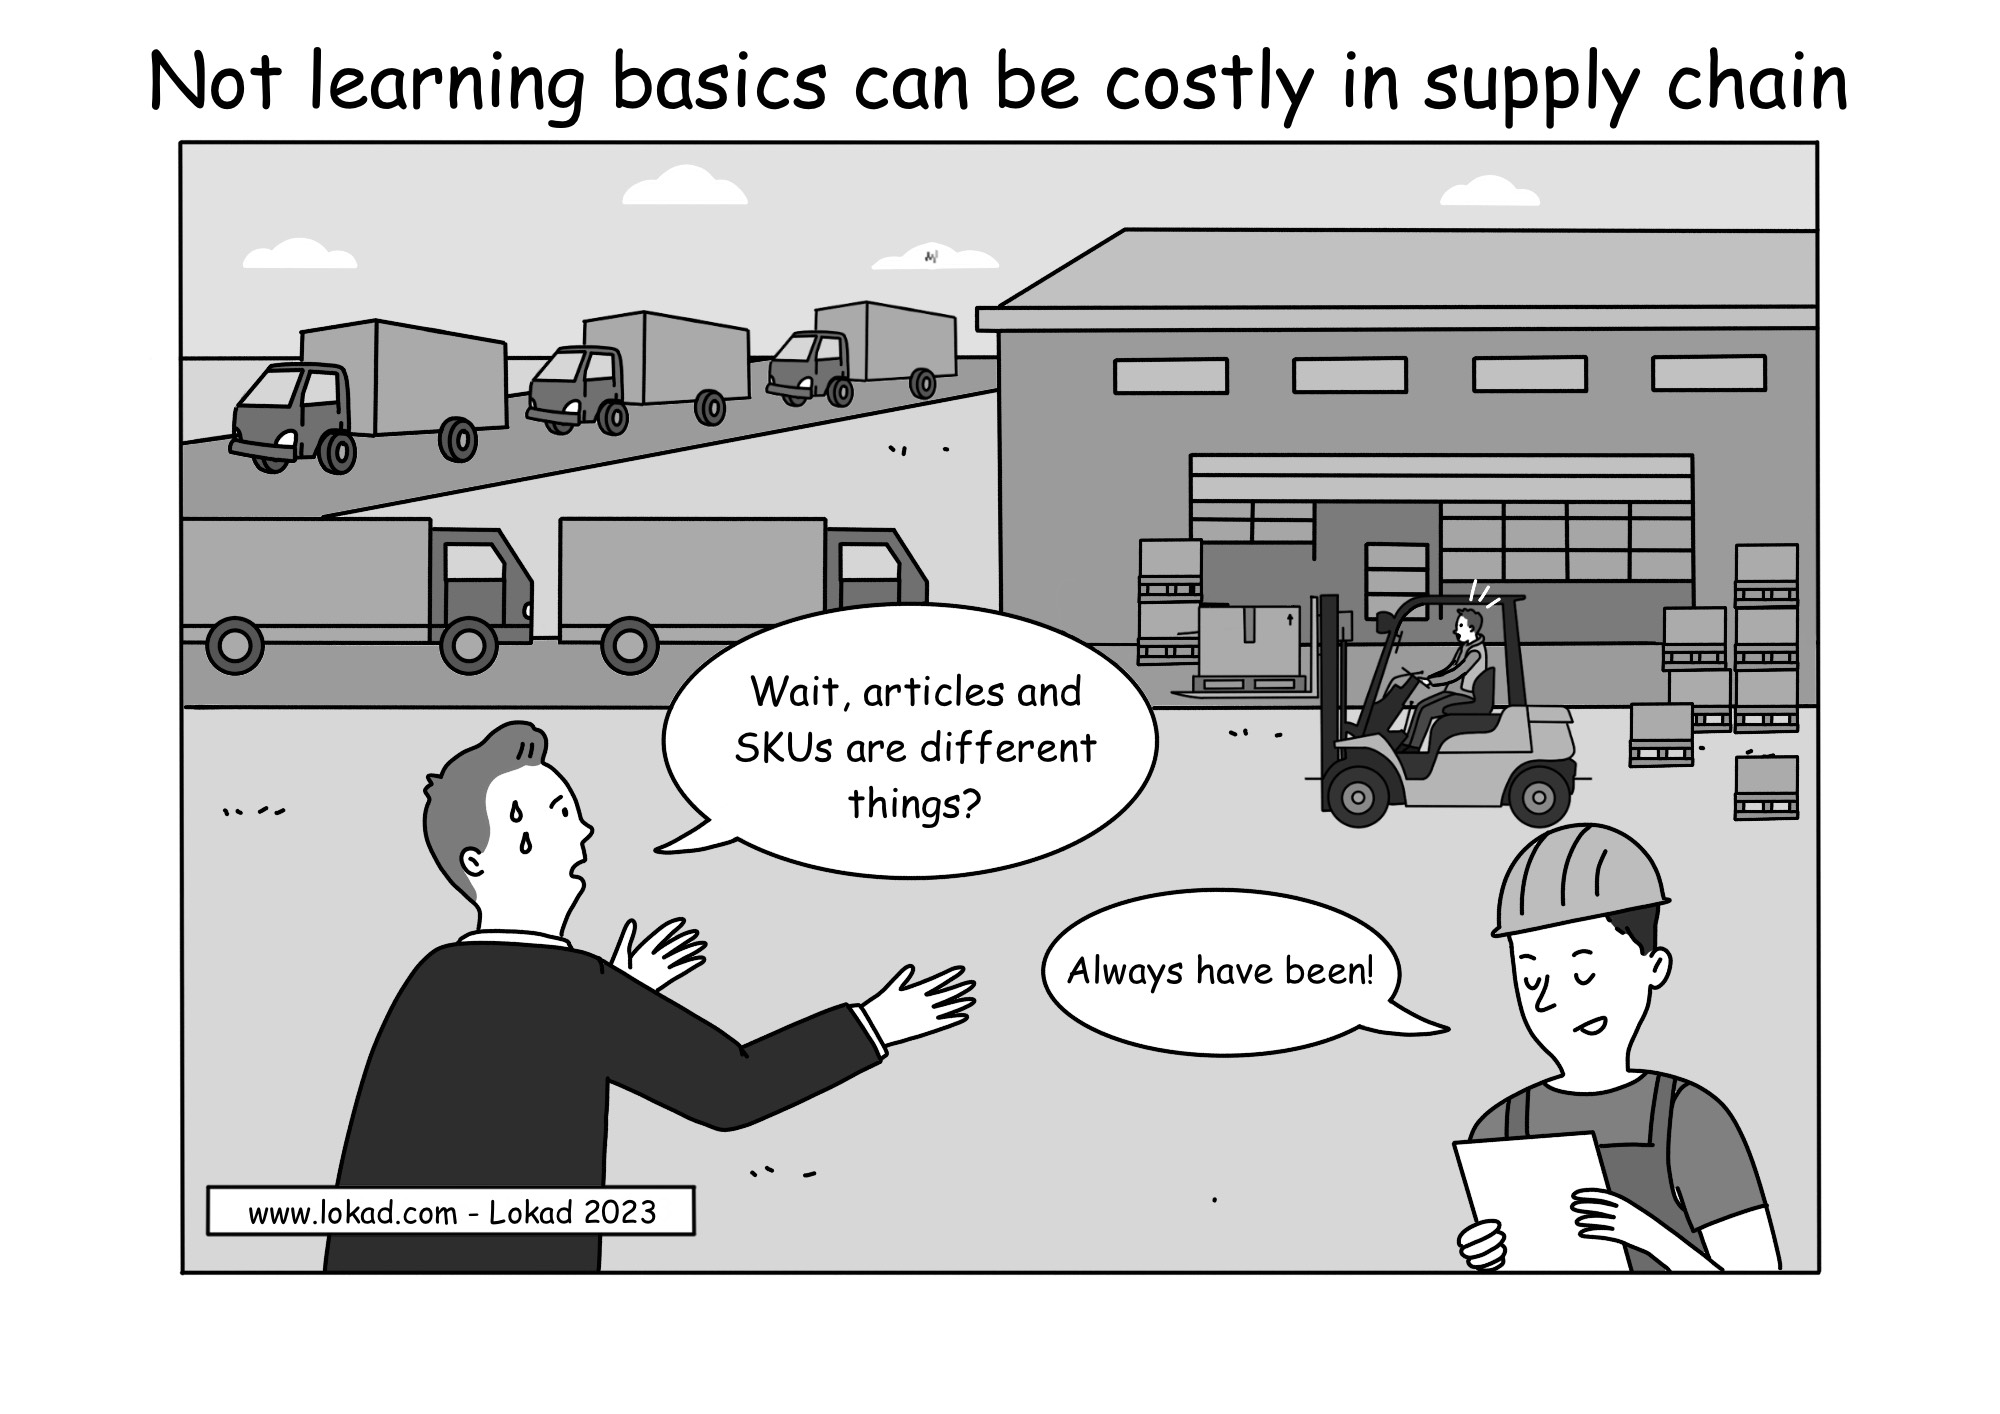 Not learning basics can be costly in supply chain